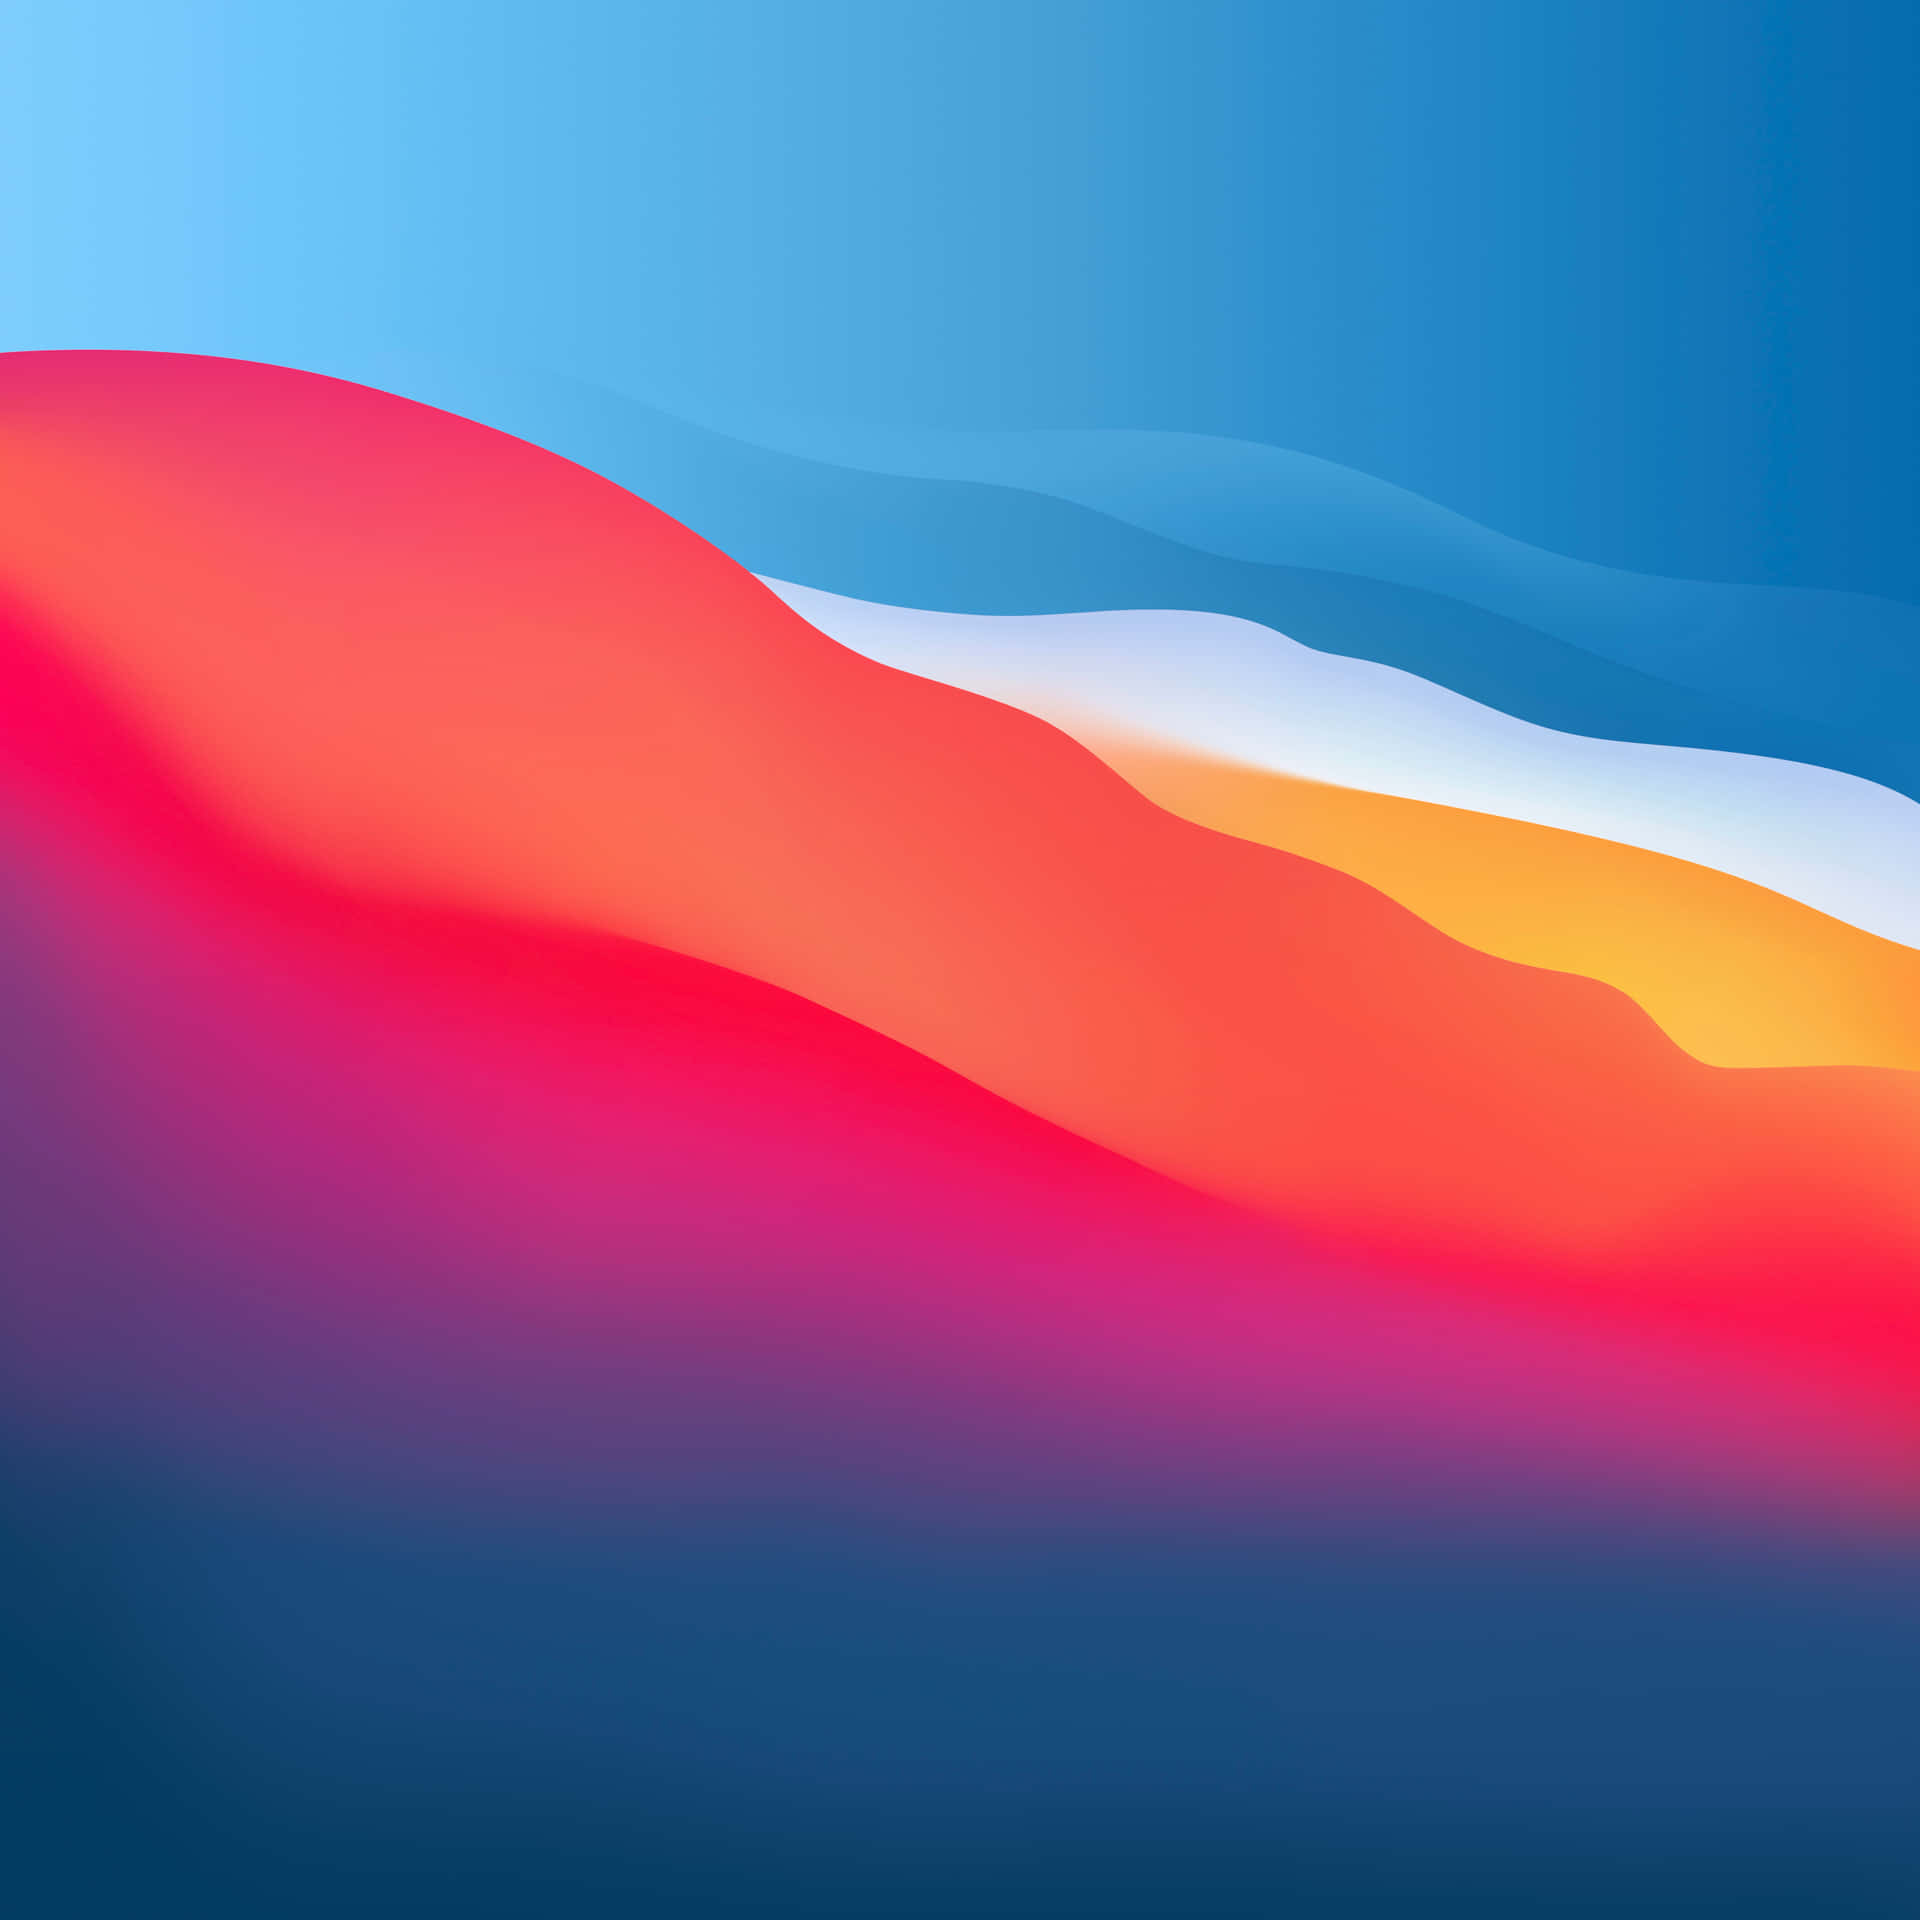 An Abstract Image Of A Colorful, Blue And Red Background Wallpaper